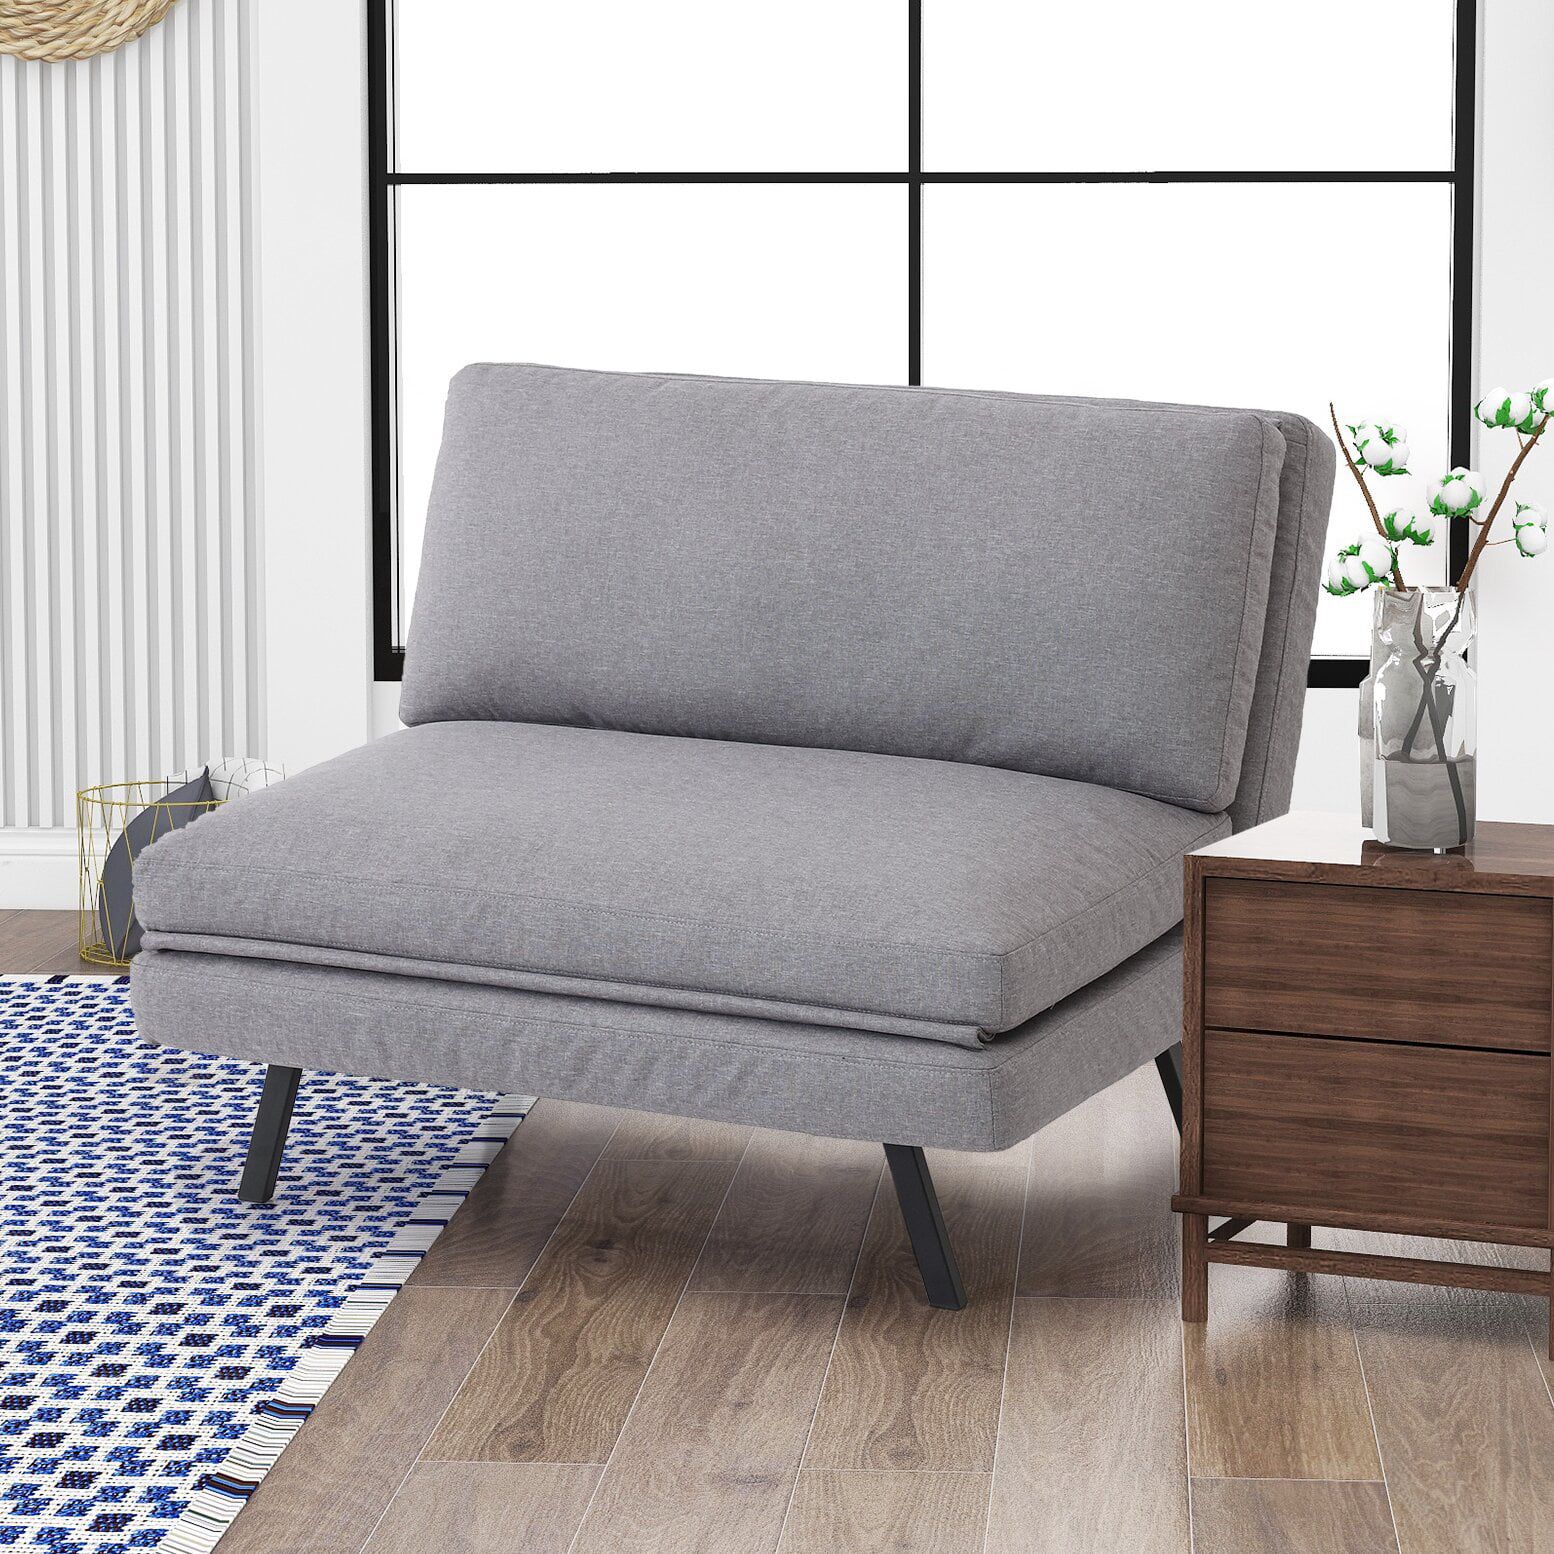 Smiaoer Tri Fold Fabric Convertible Futon, Sleeper Sofa Bed Flip Chair With Regard To 2 In 1 Foldable Sofas (Gallery 12 of 20)